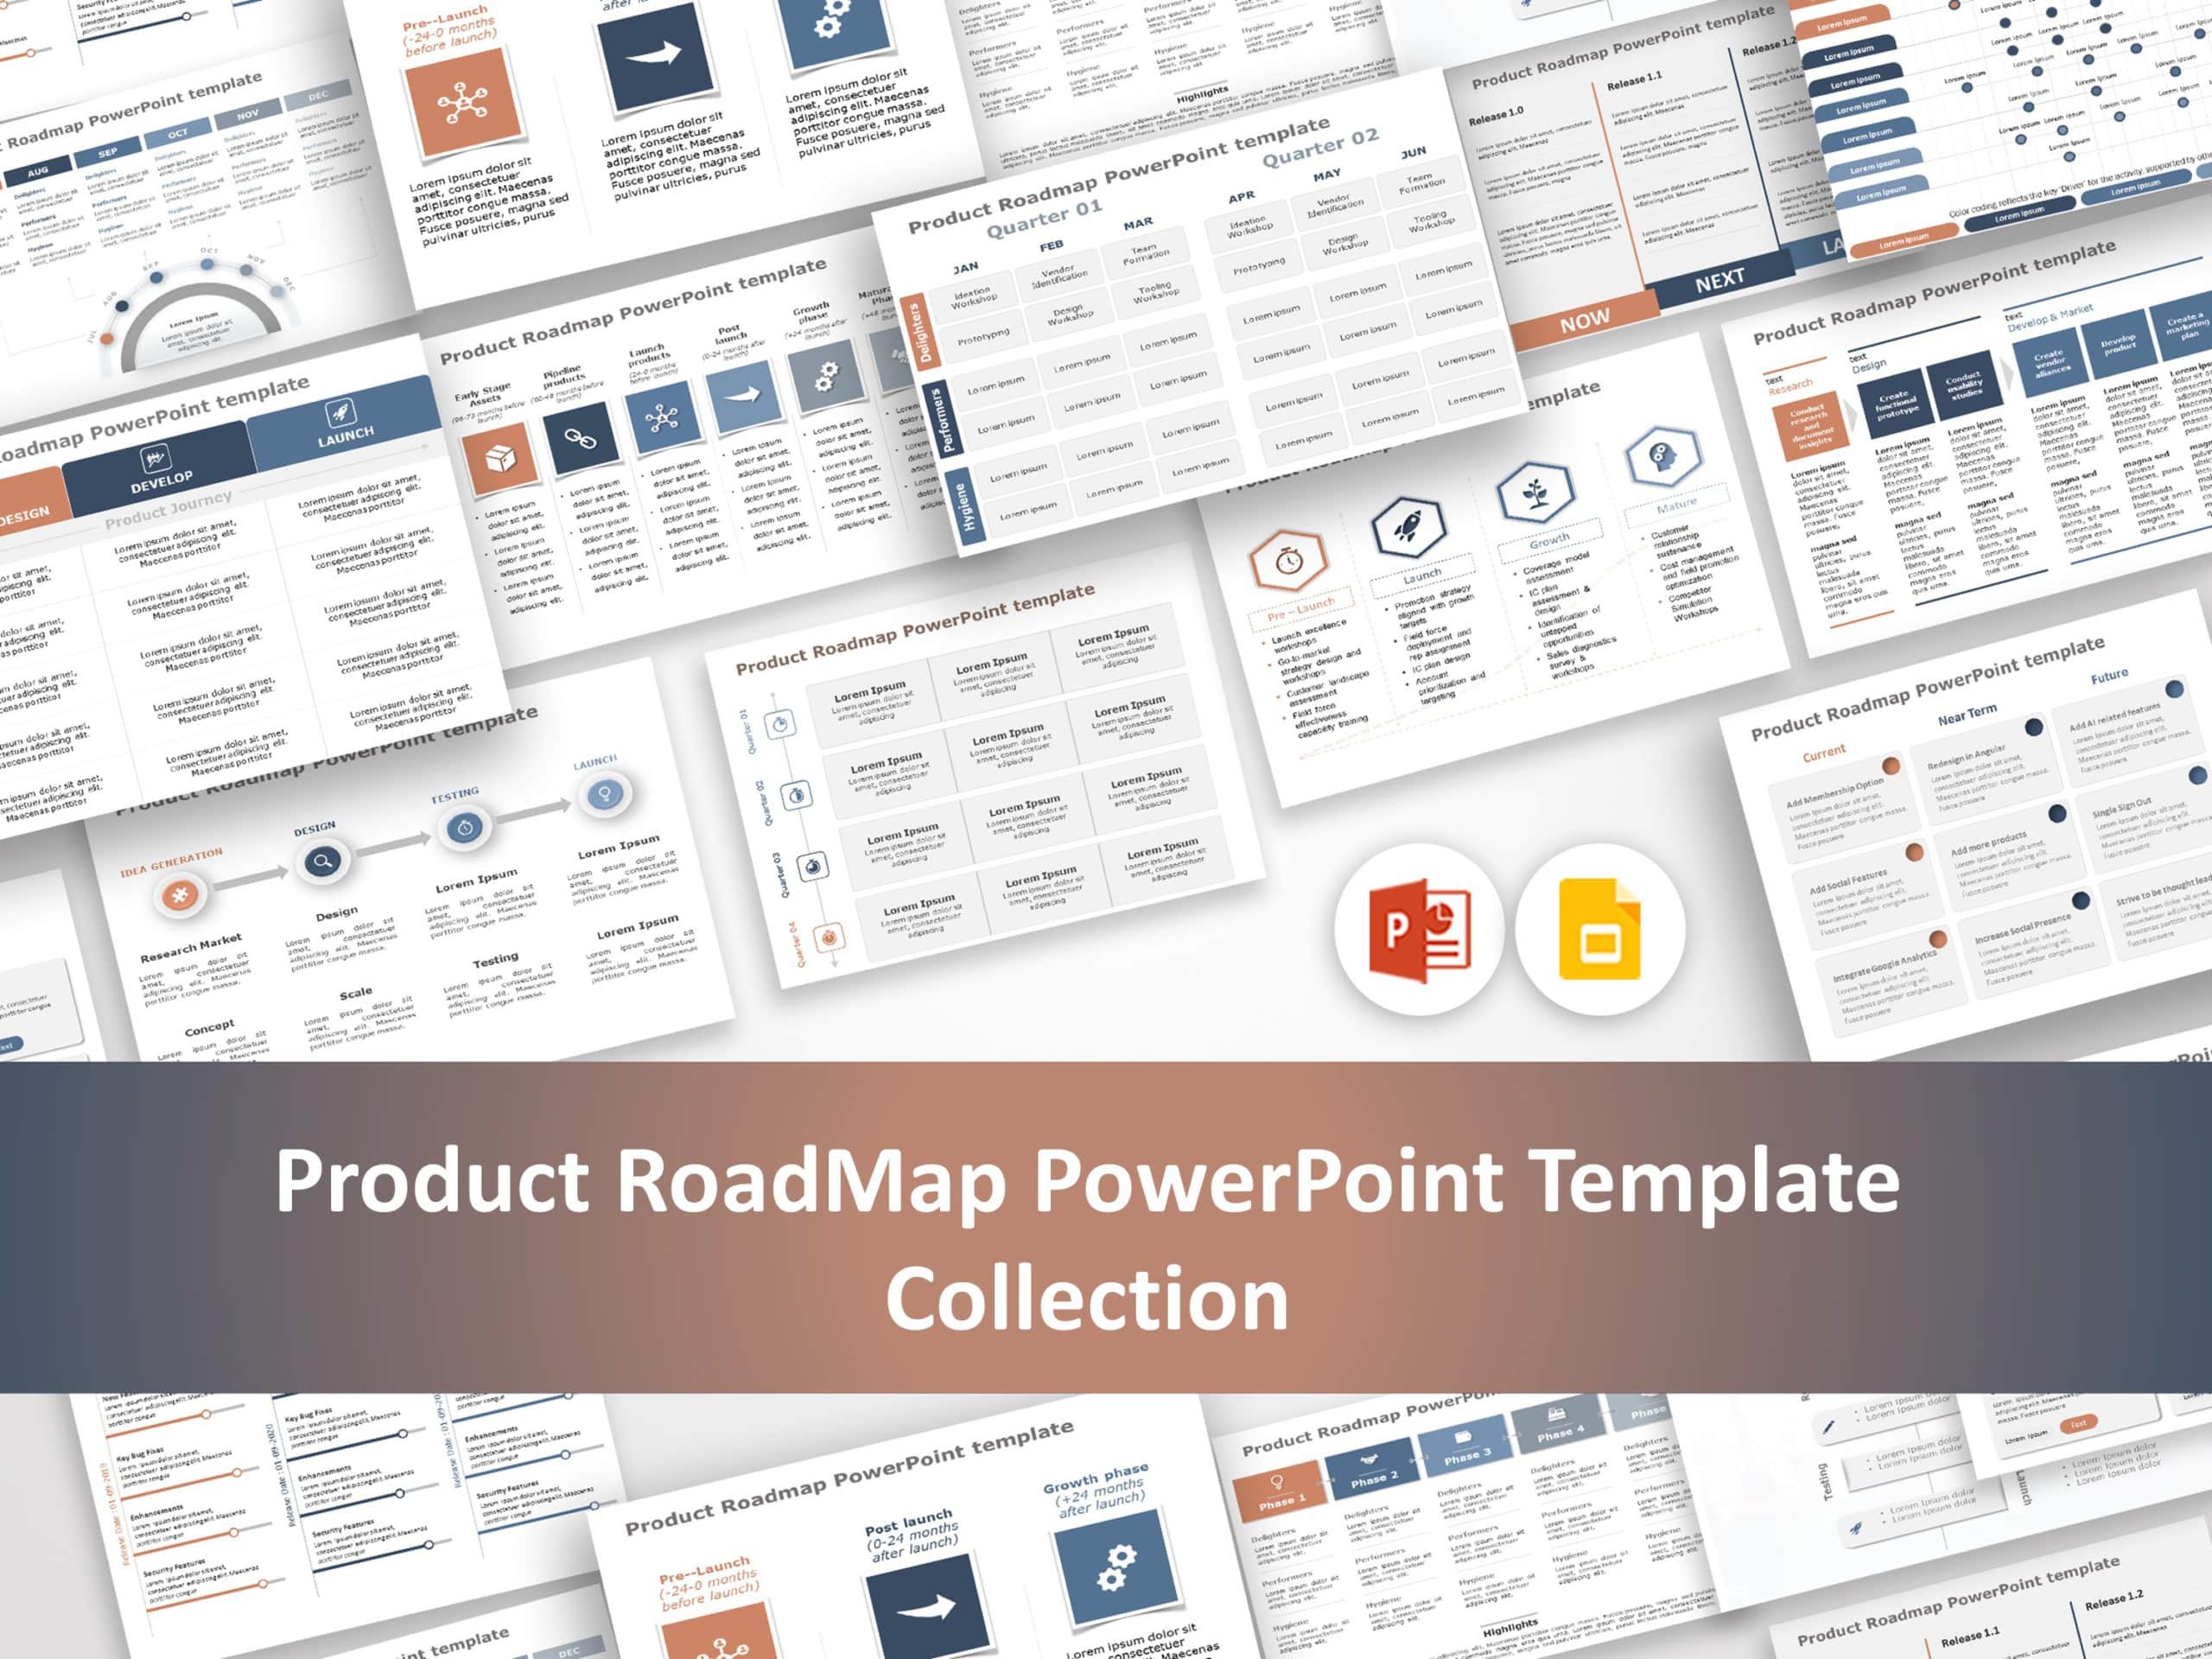 Product RoadMap PowerPoint Templates